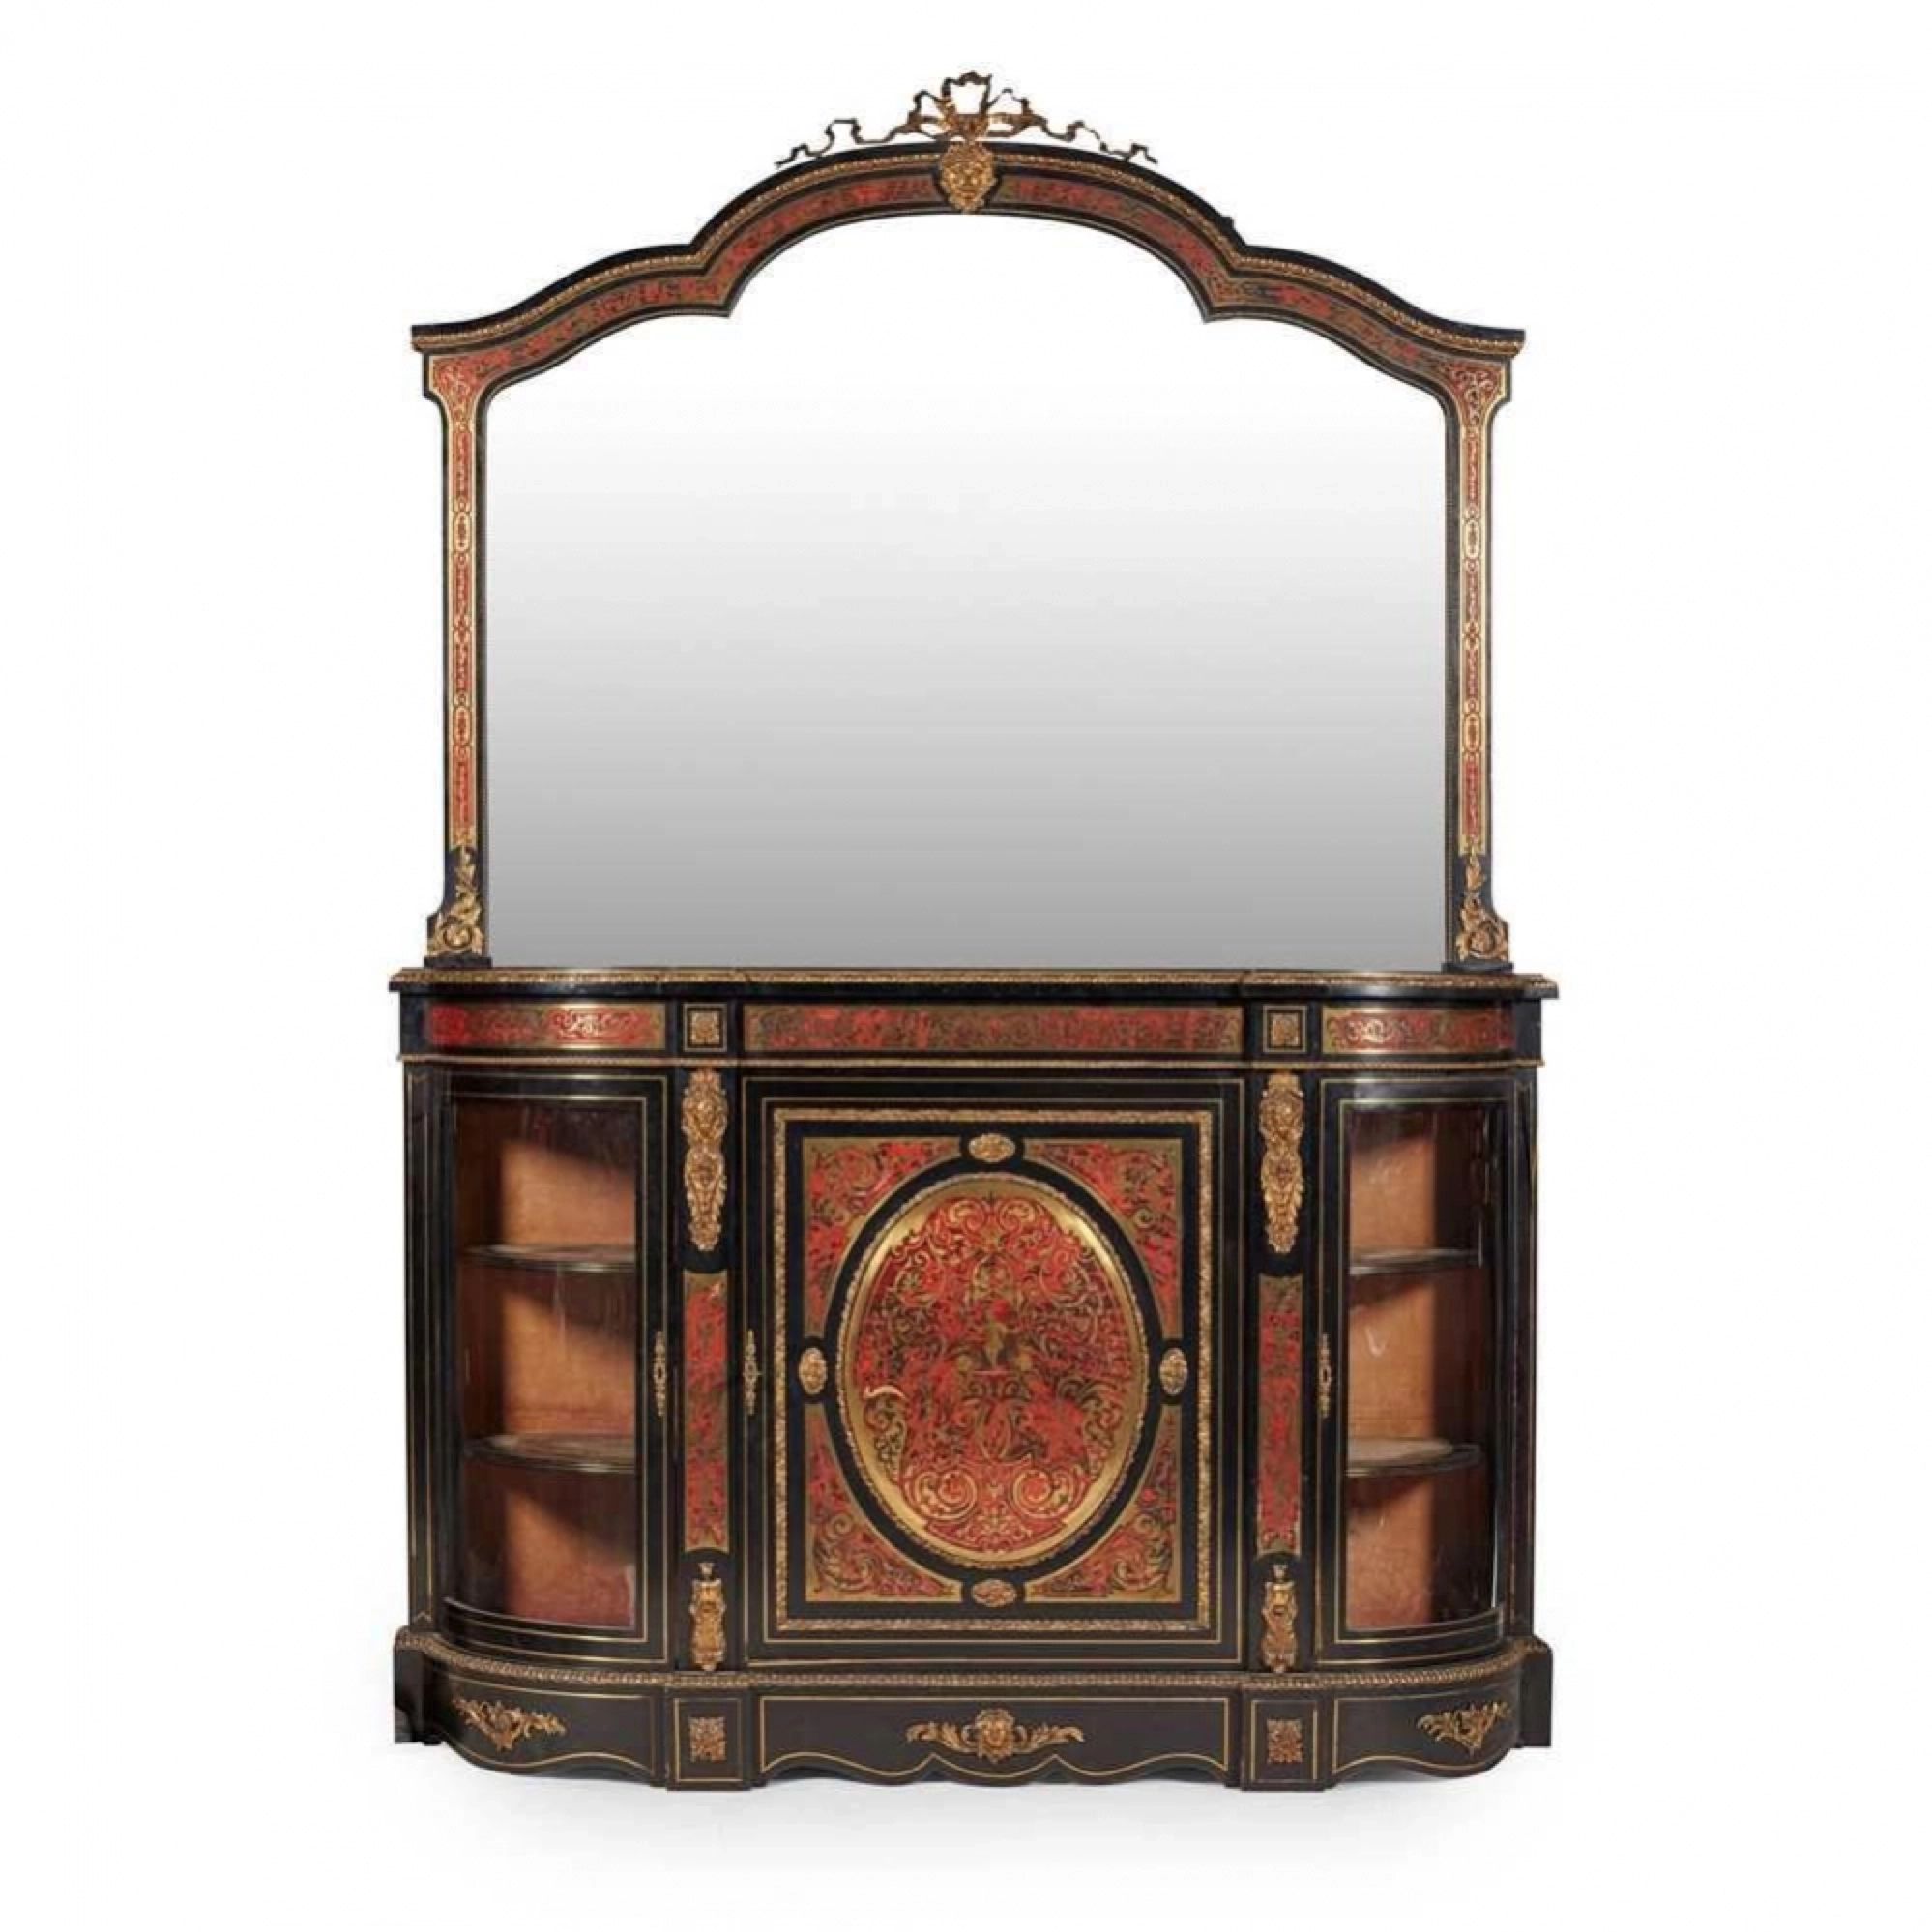 Luxurious-chest-of-drawers-with-a-mirror-in-Boulle-style-